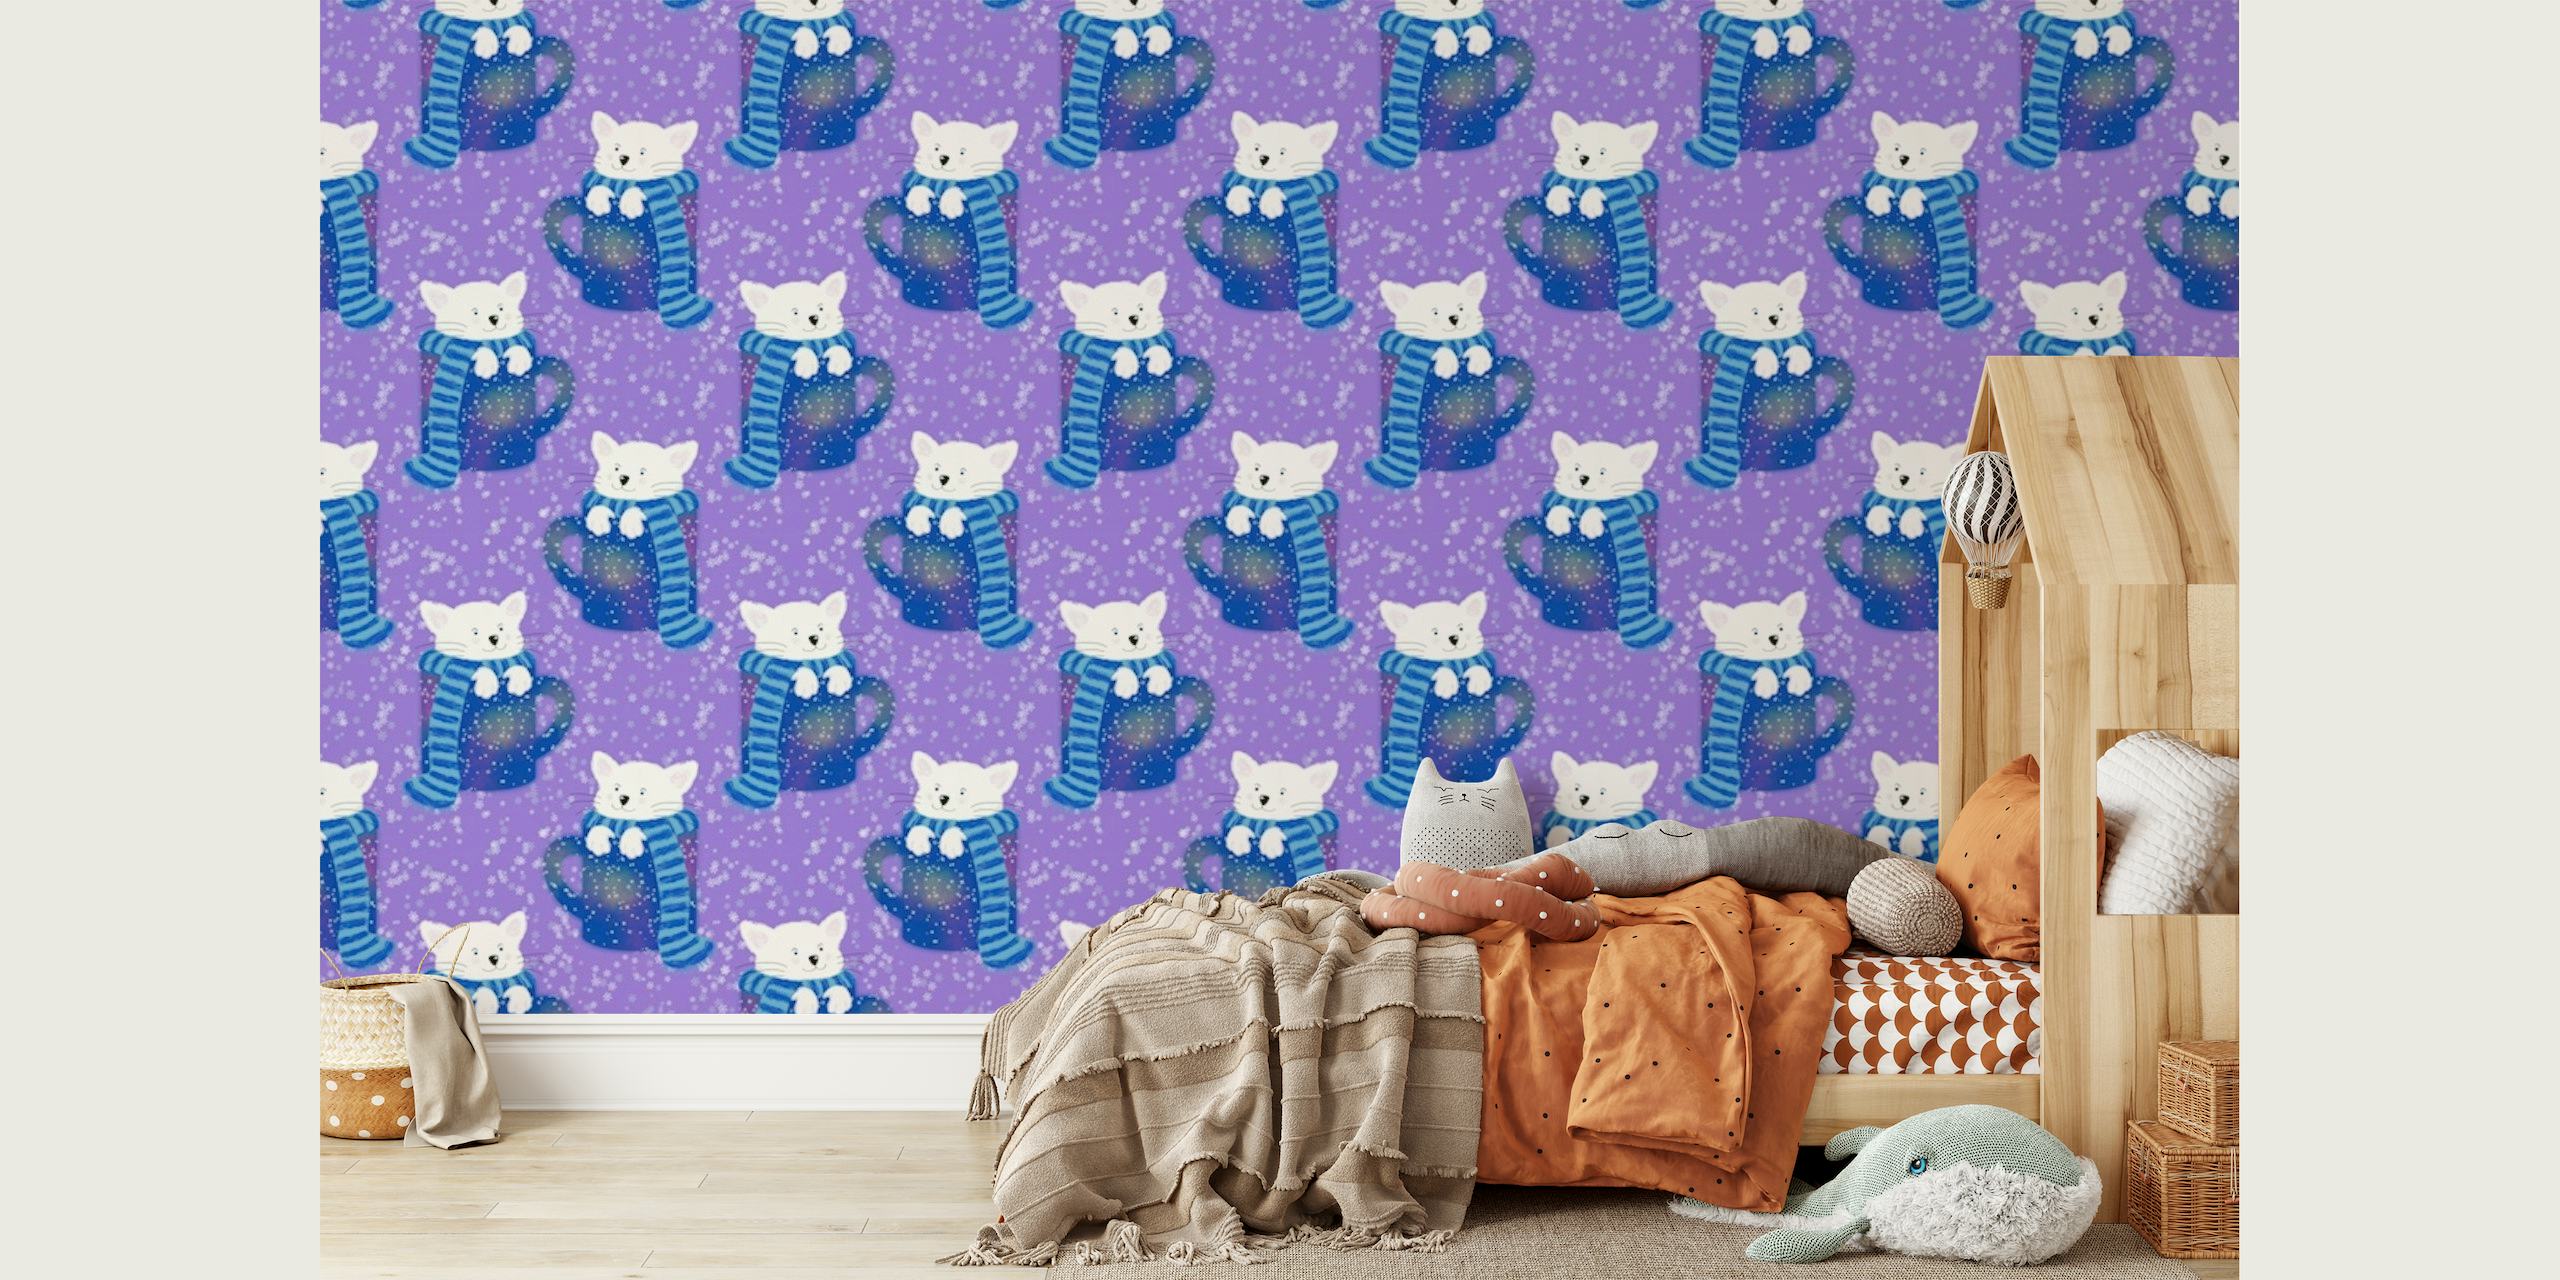 Adorable cats in teacups pattern on a purple background wall mural